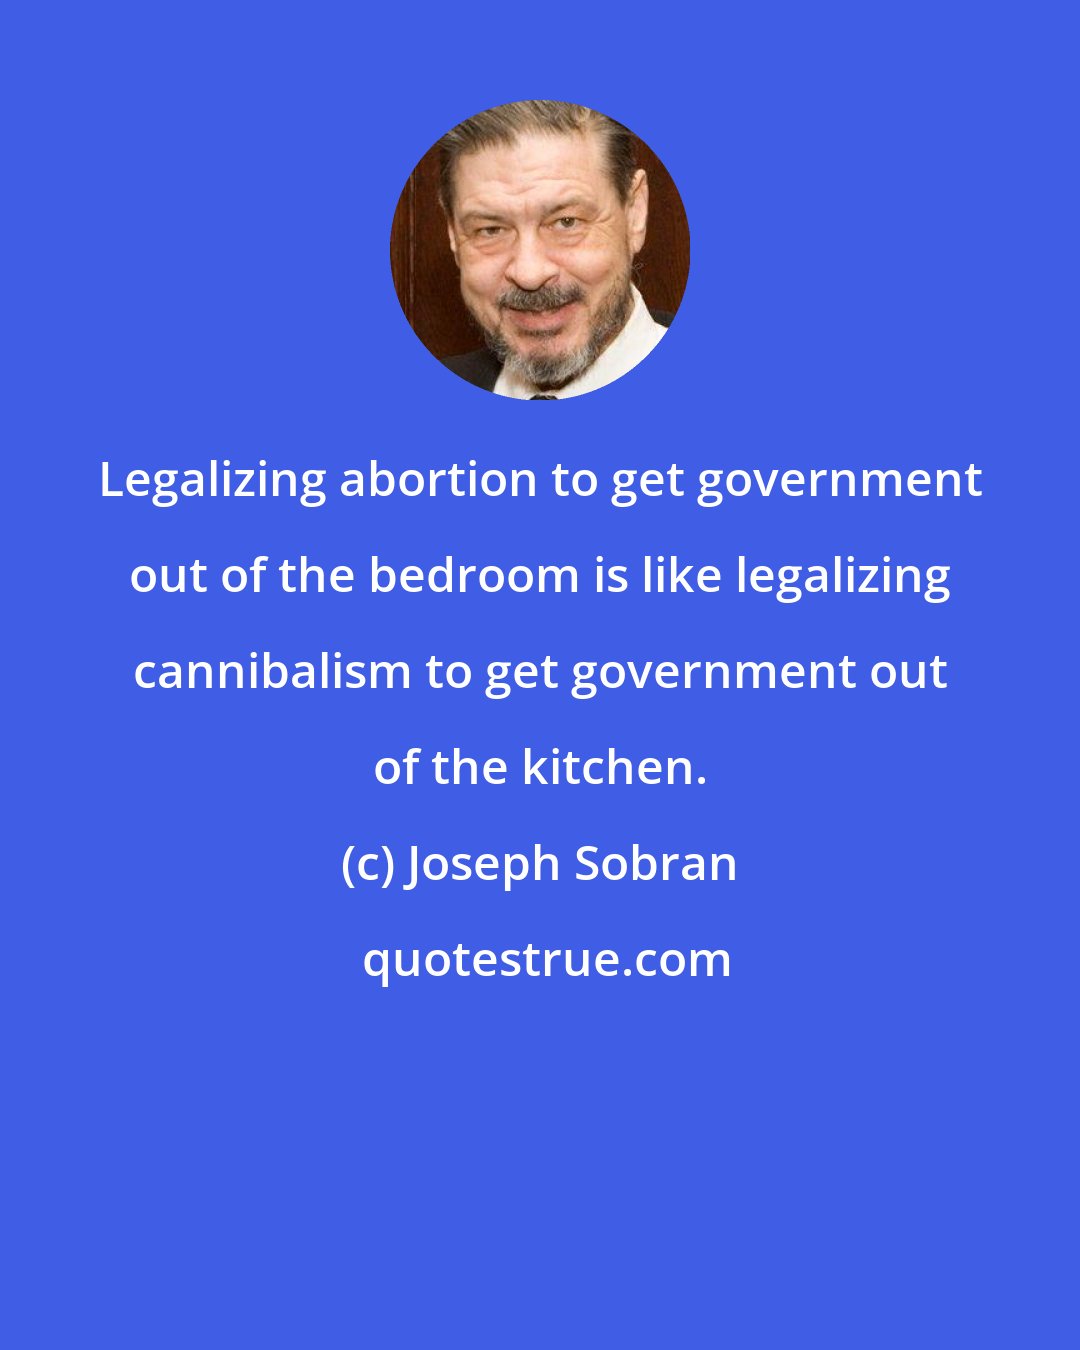 Joseph Sobran: Legalizing abortion to get government out of the bedroom is like legalizing cannibalism to get government out of the kitchen.